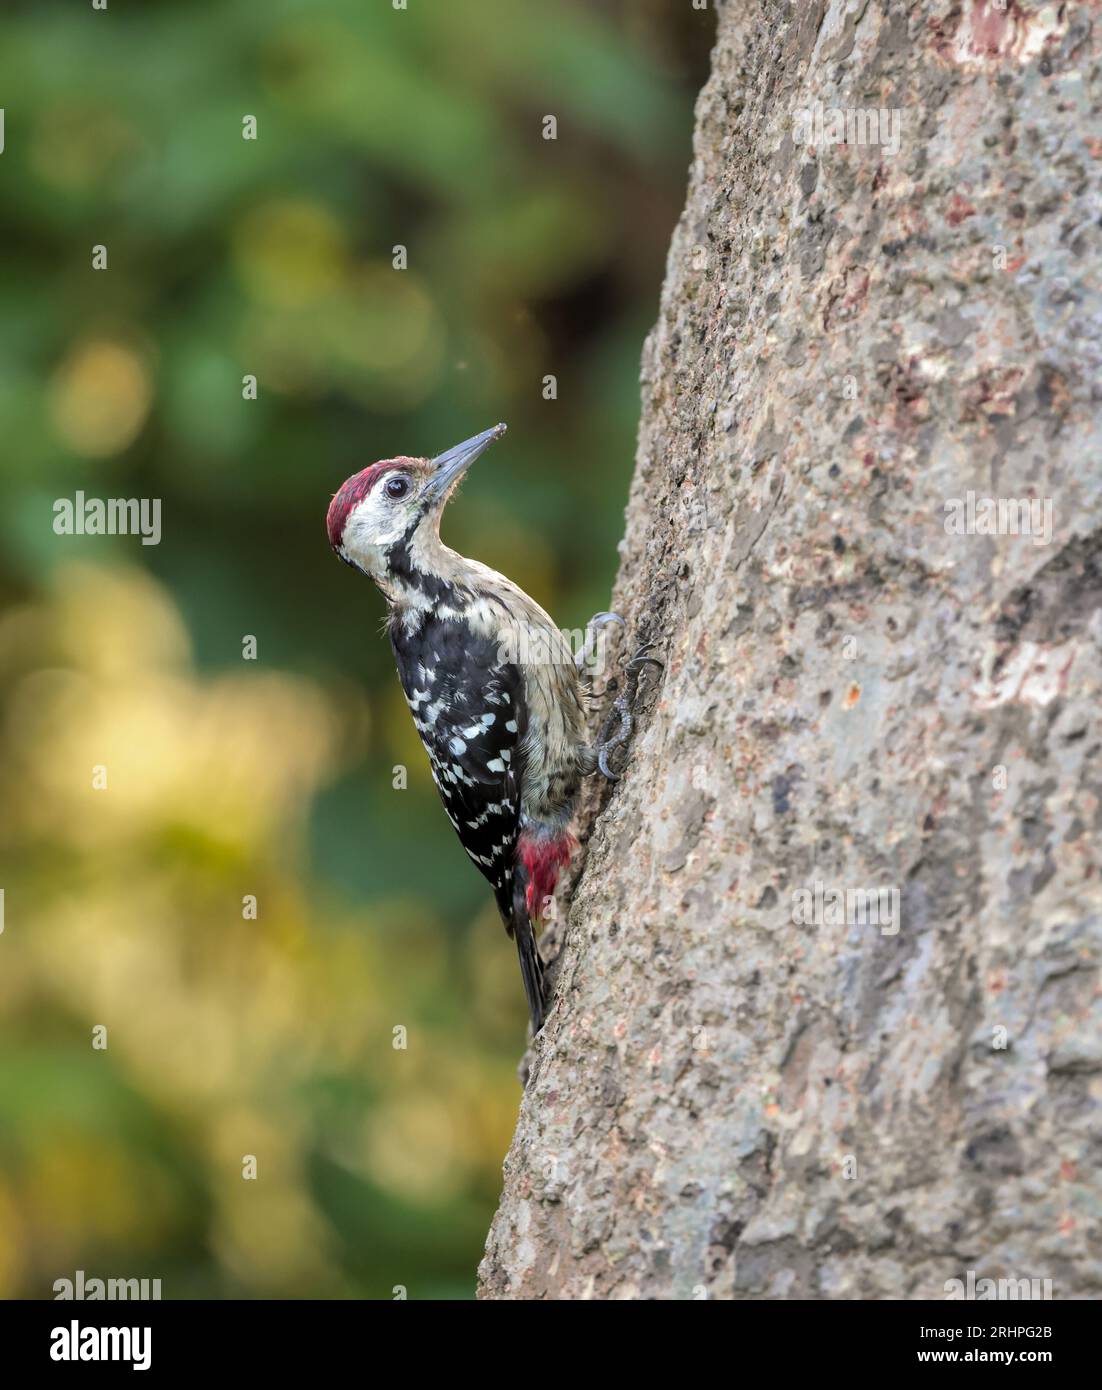 fulvous-breasted woodpecker is a species of bird in the family Picidae. It is found in Bangladesh, Bhutan, Nepal, India and Myanmar. Stock Photo